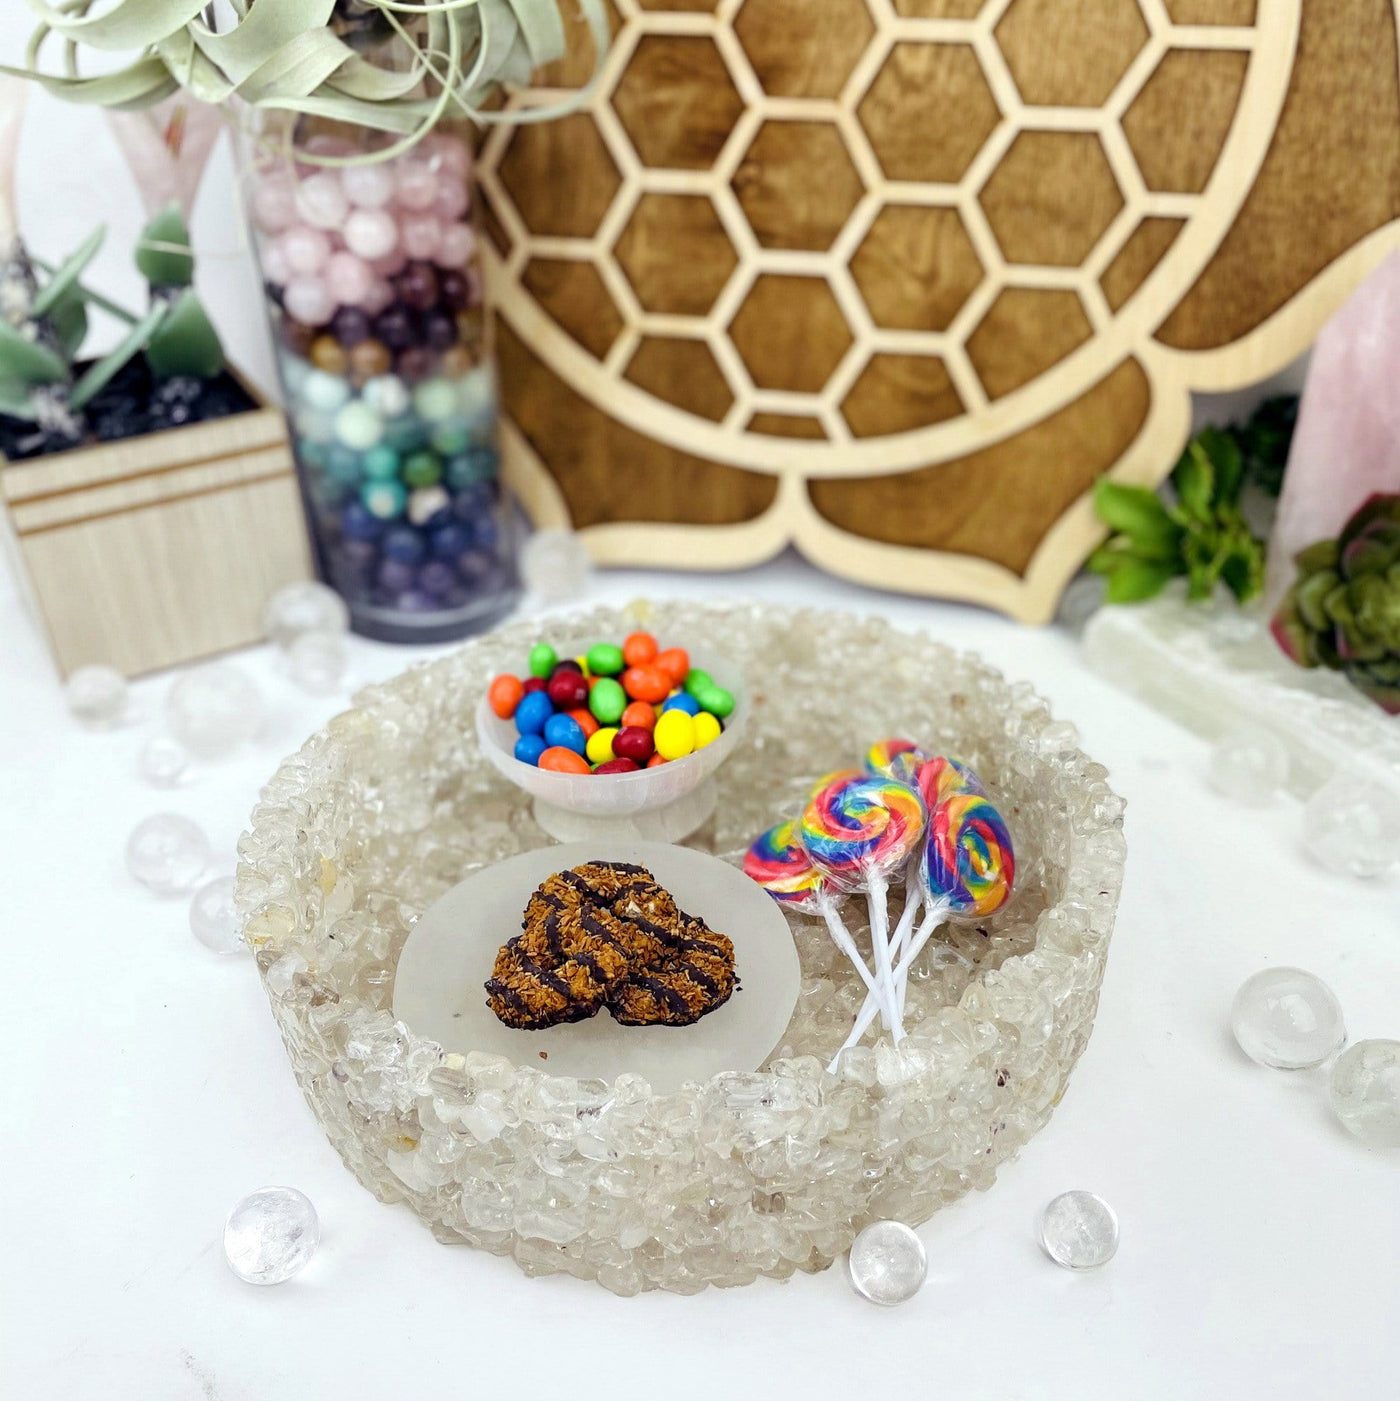 Tumbled Stone Bowl  - crystal with cookies and candy in it